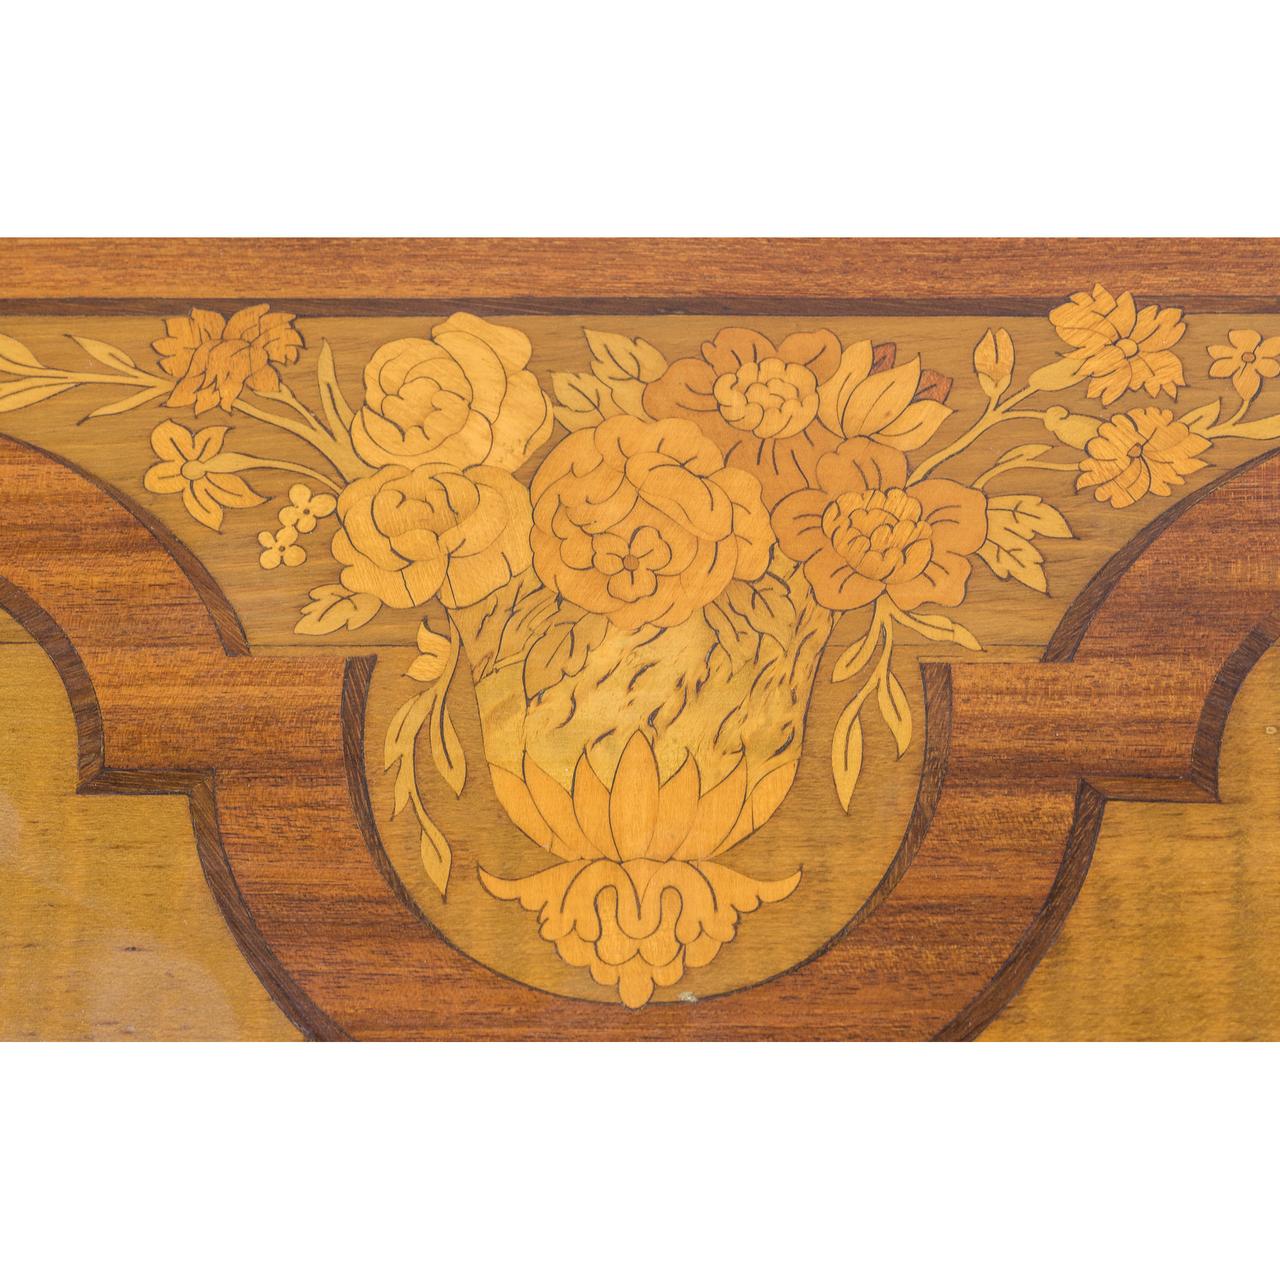 19th Century French Ormolu Mounted Marquetry Center Table by E. Khan & Cie. For Sale 6